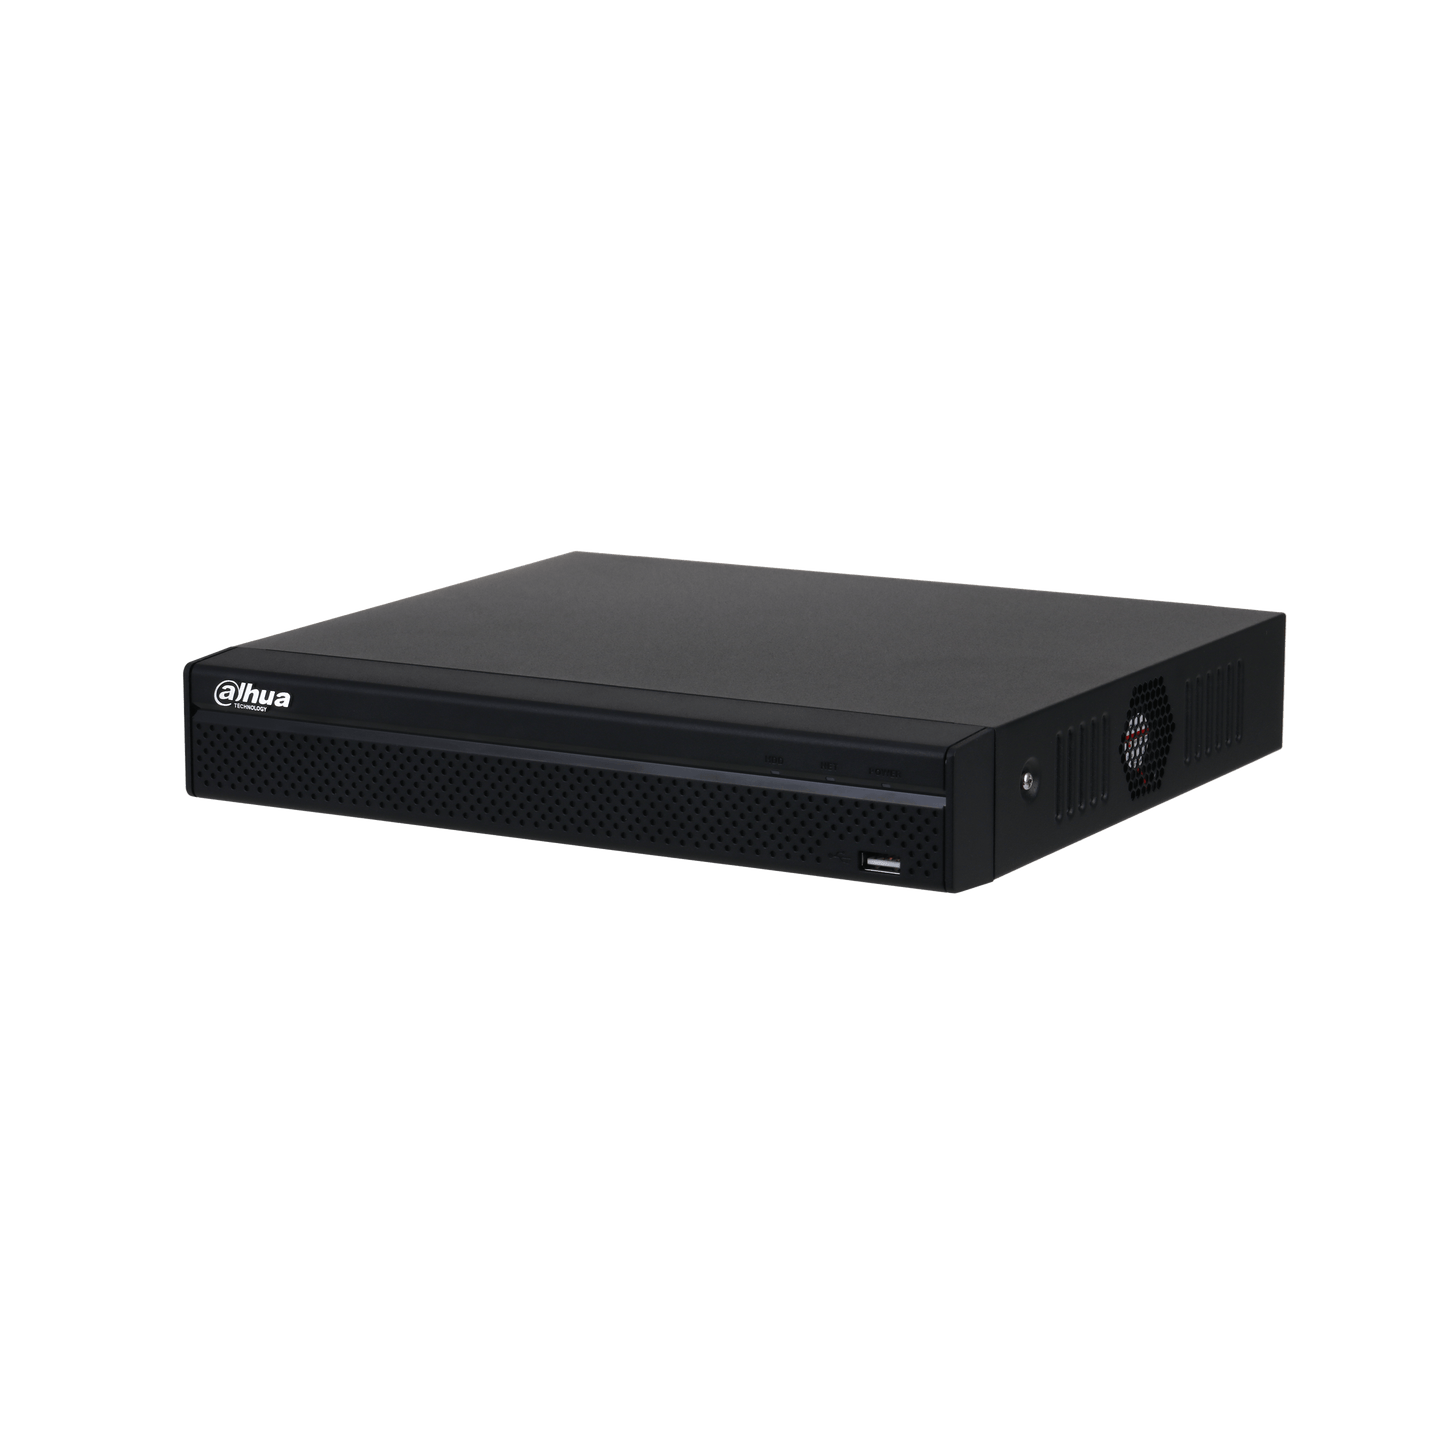 4 Channel Dahua DHI-NVR4104HS-P-4KS2/L 4 Channel Compact 1U 1HDD 4PoE Network Video Recorder